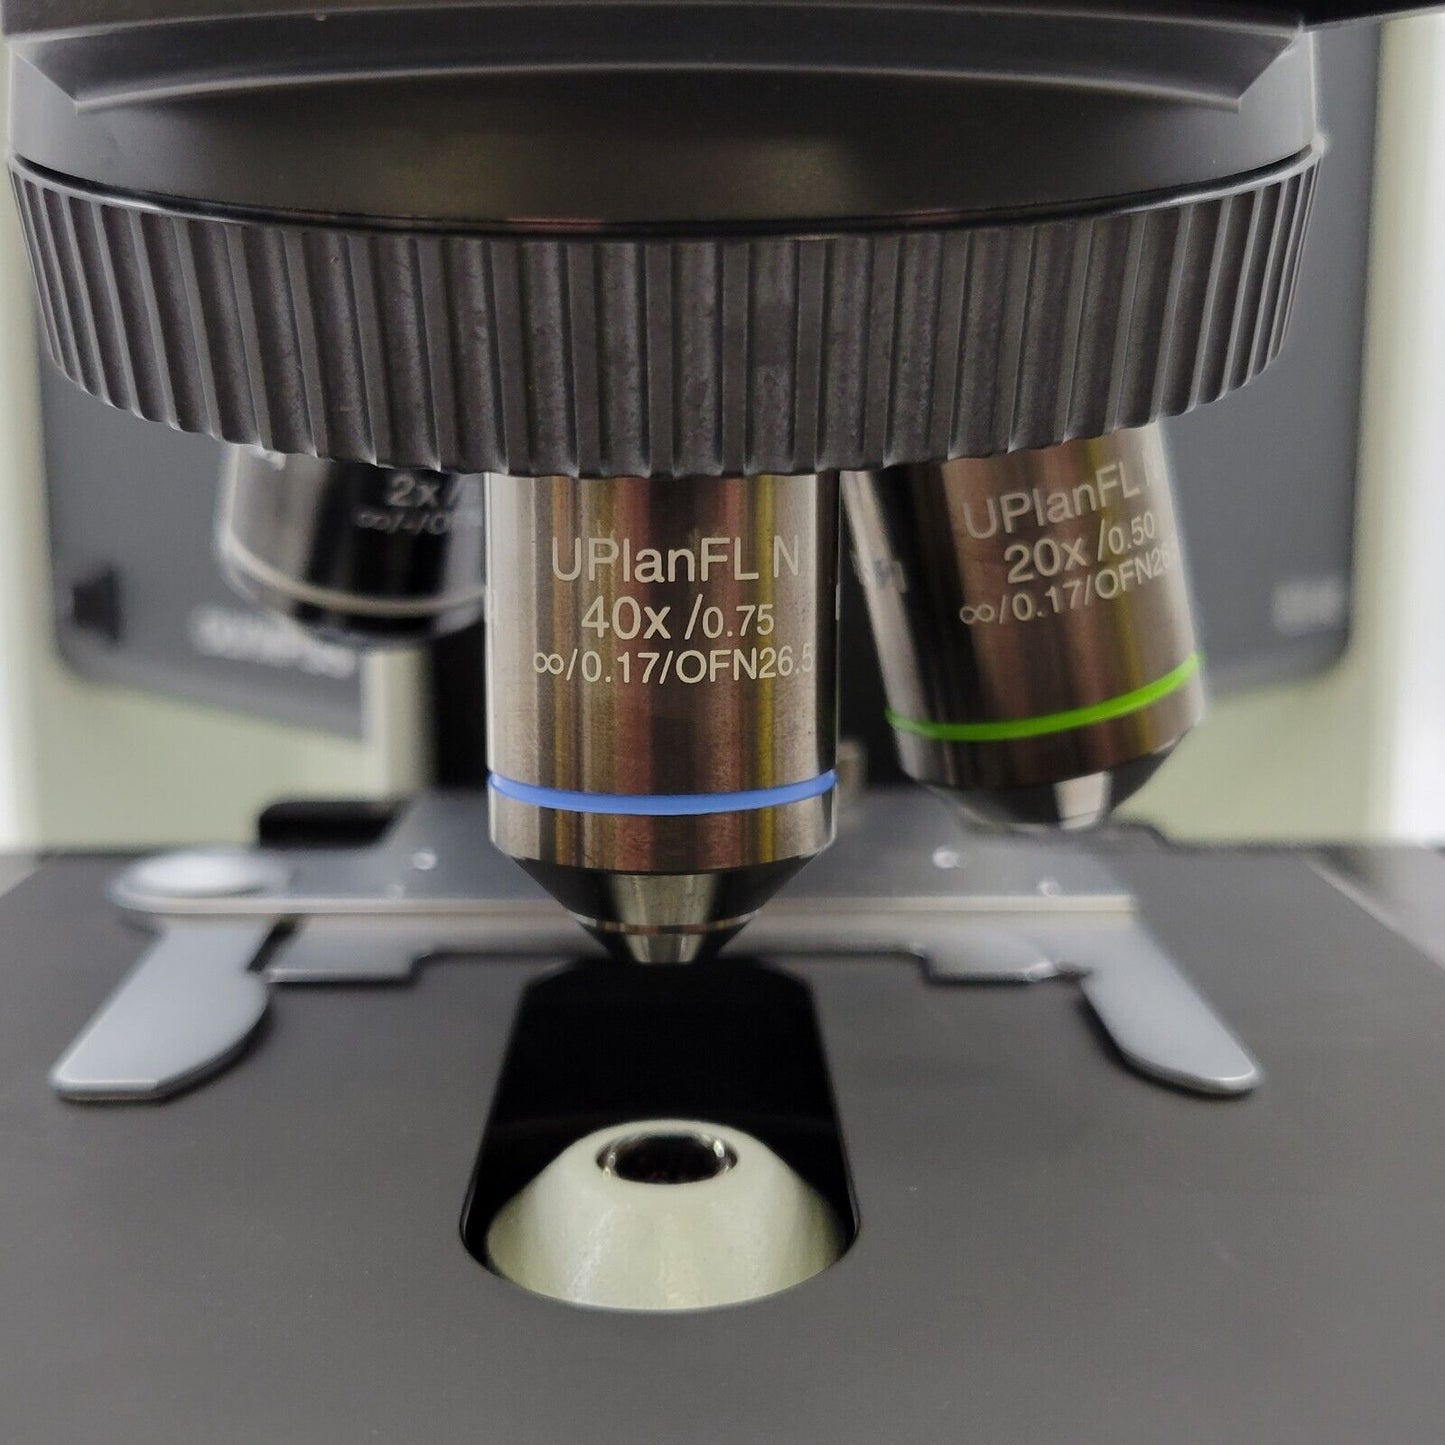 Olympus Microscope BX46 LED with Apo 2x, Fluorite Objectives and Trinocular Head - microscopemarketplace